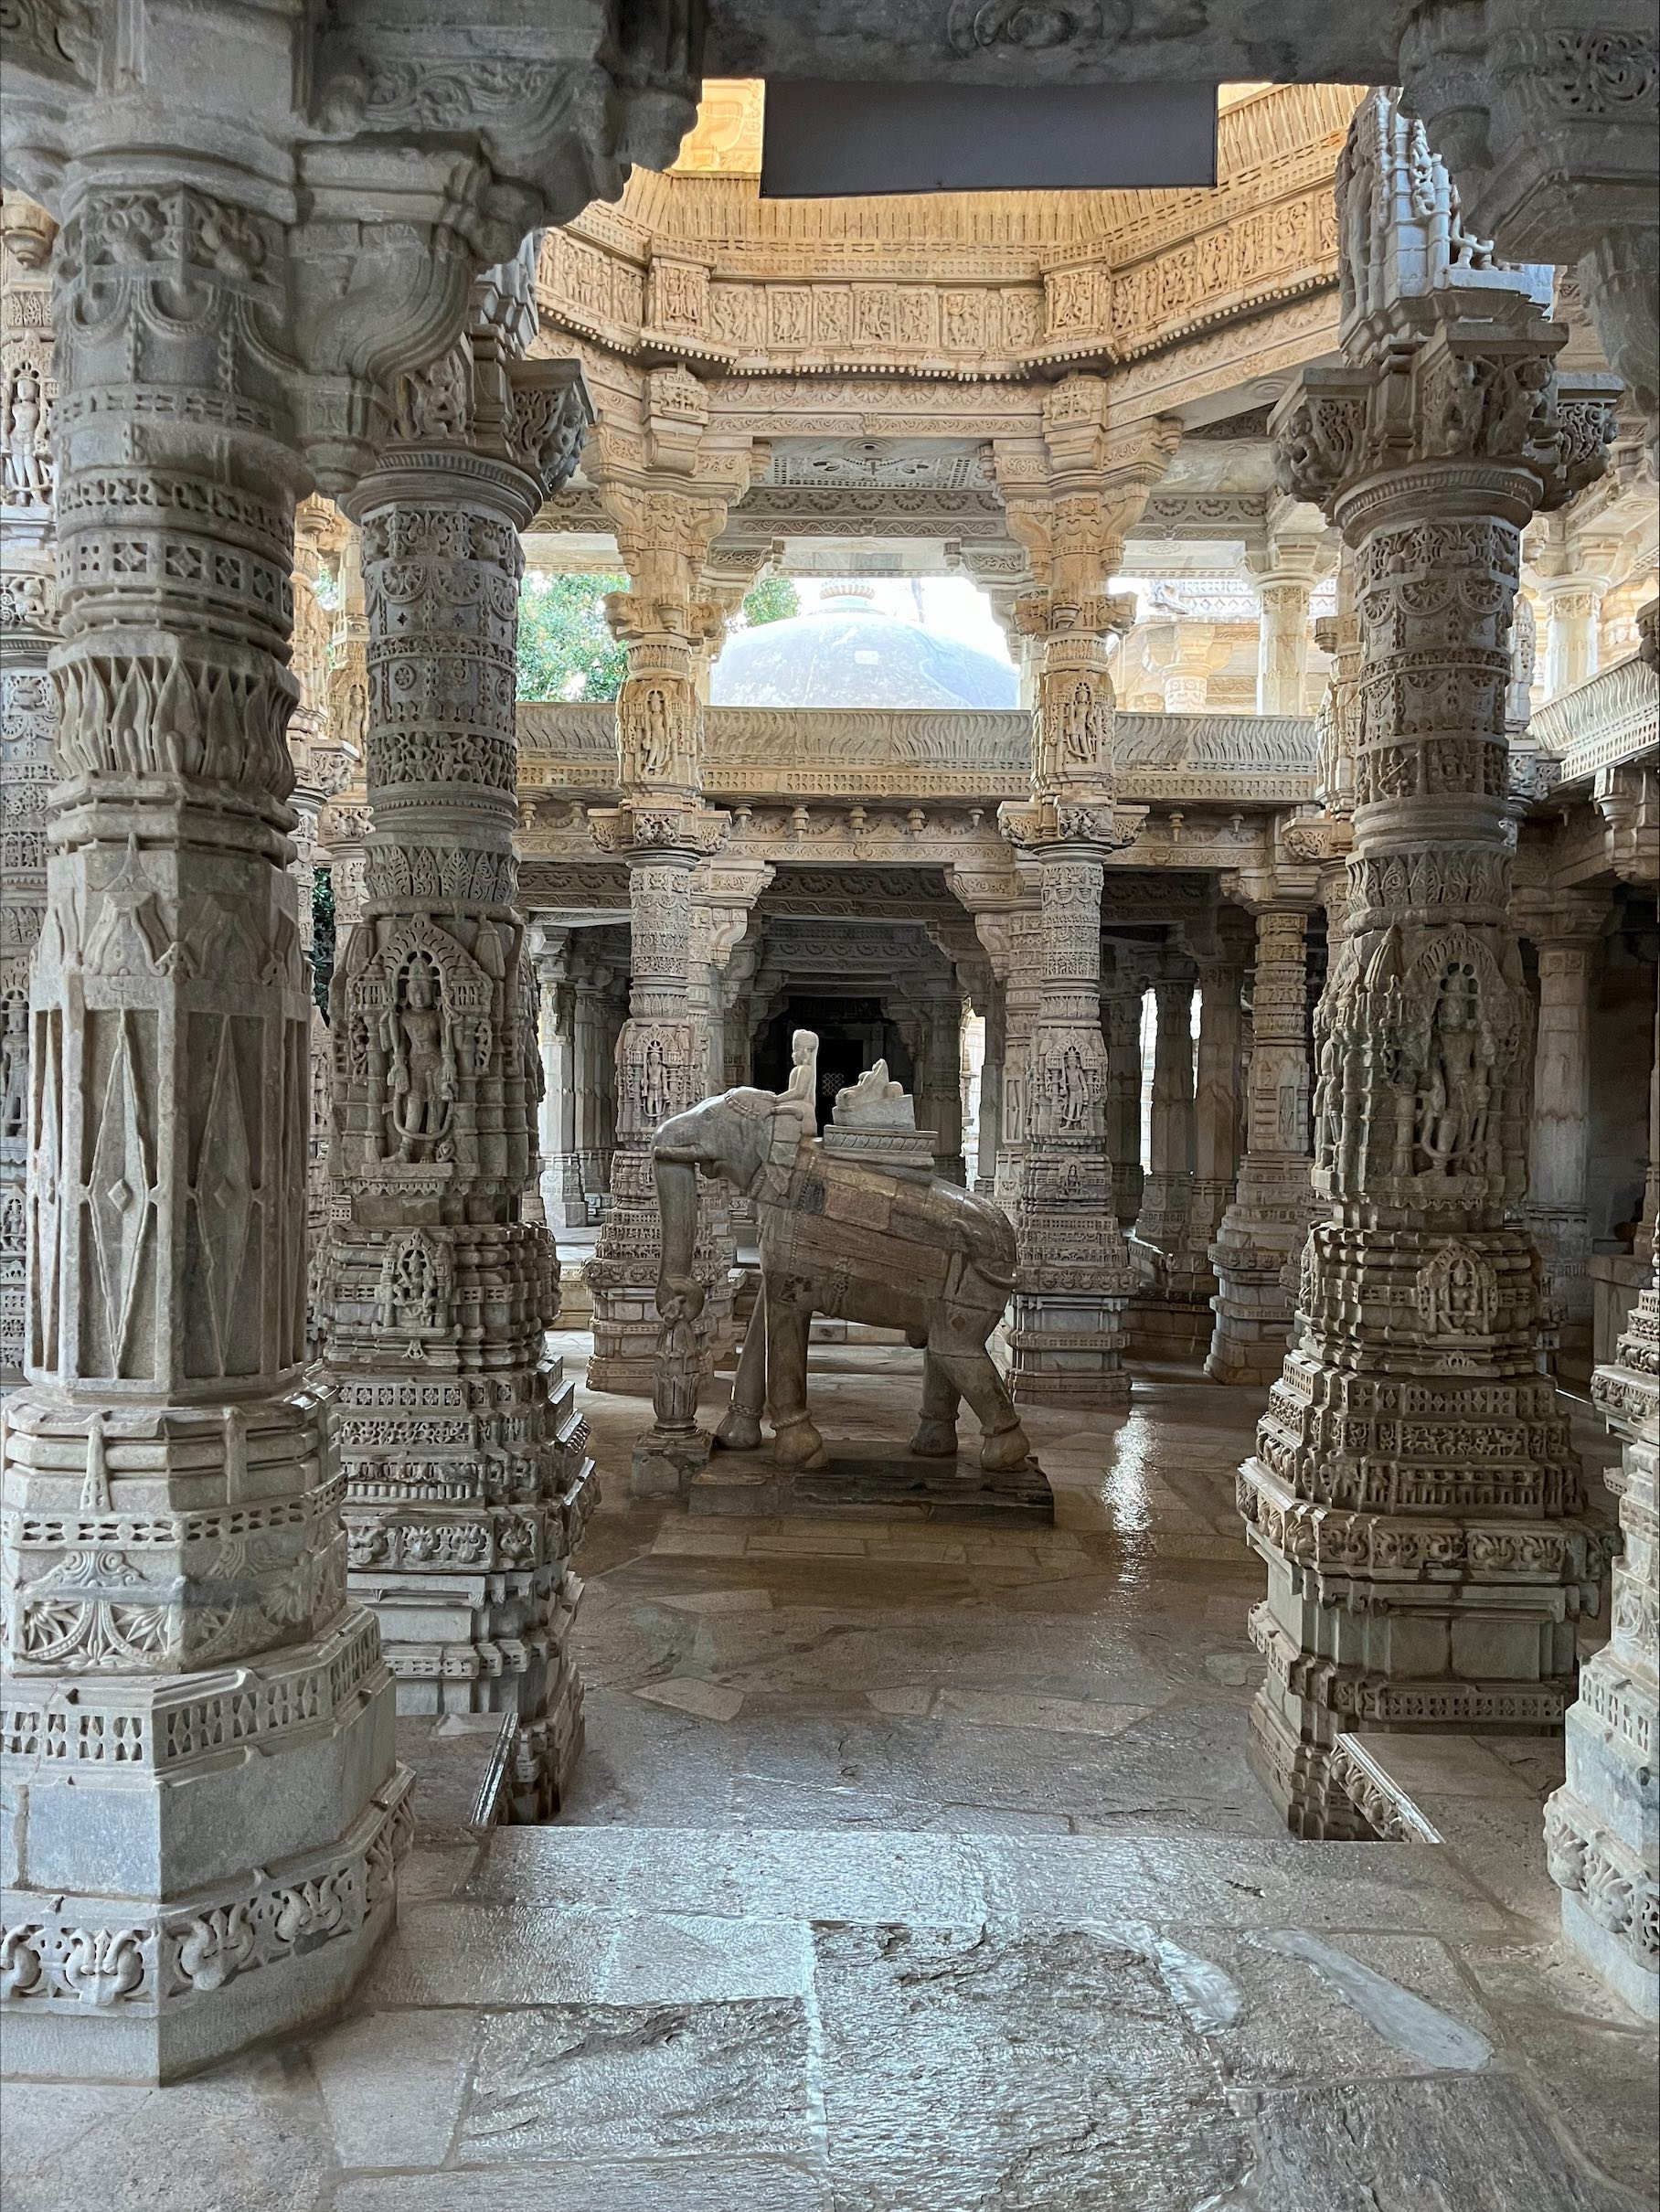 The temple in Ranakpur, India.